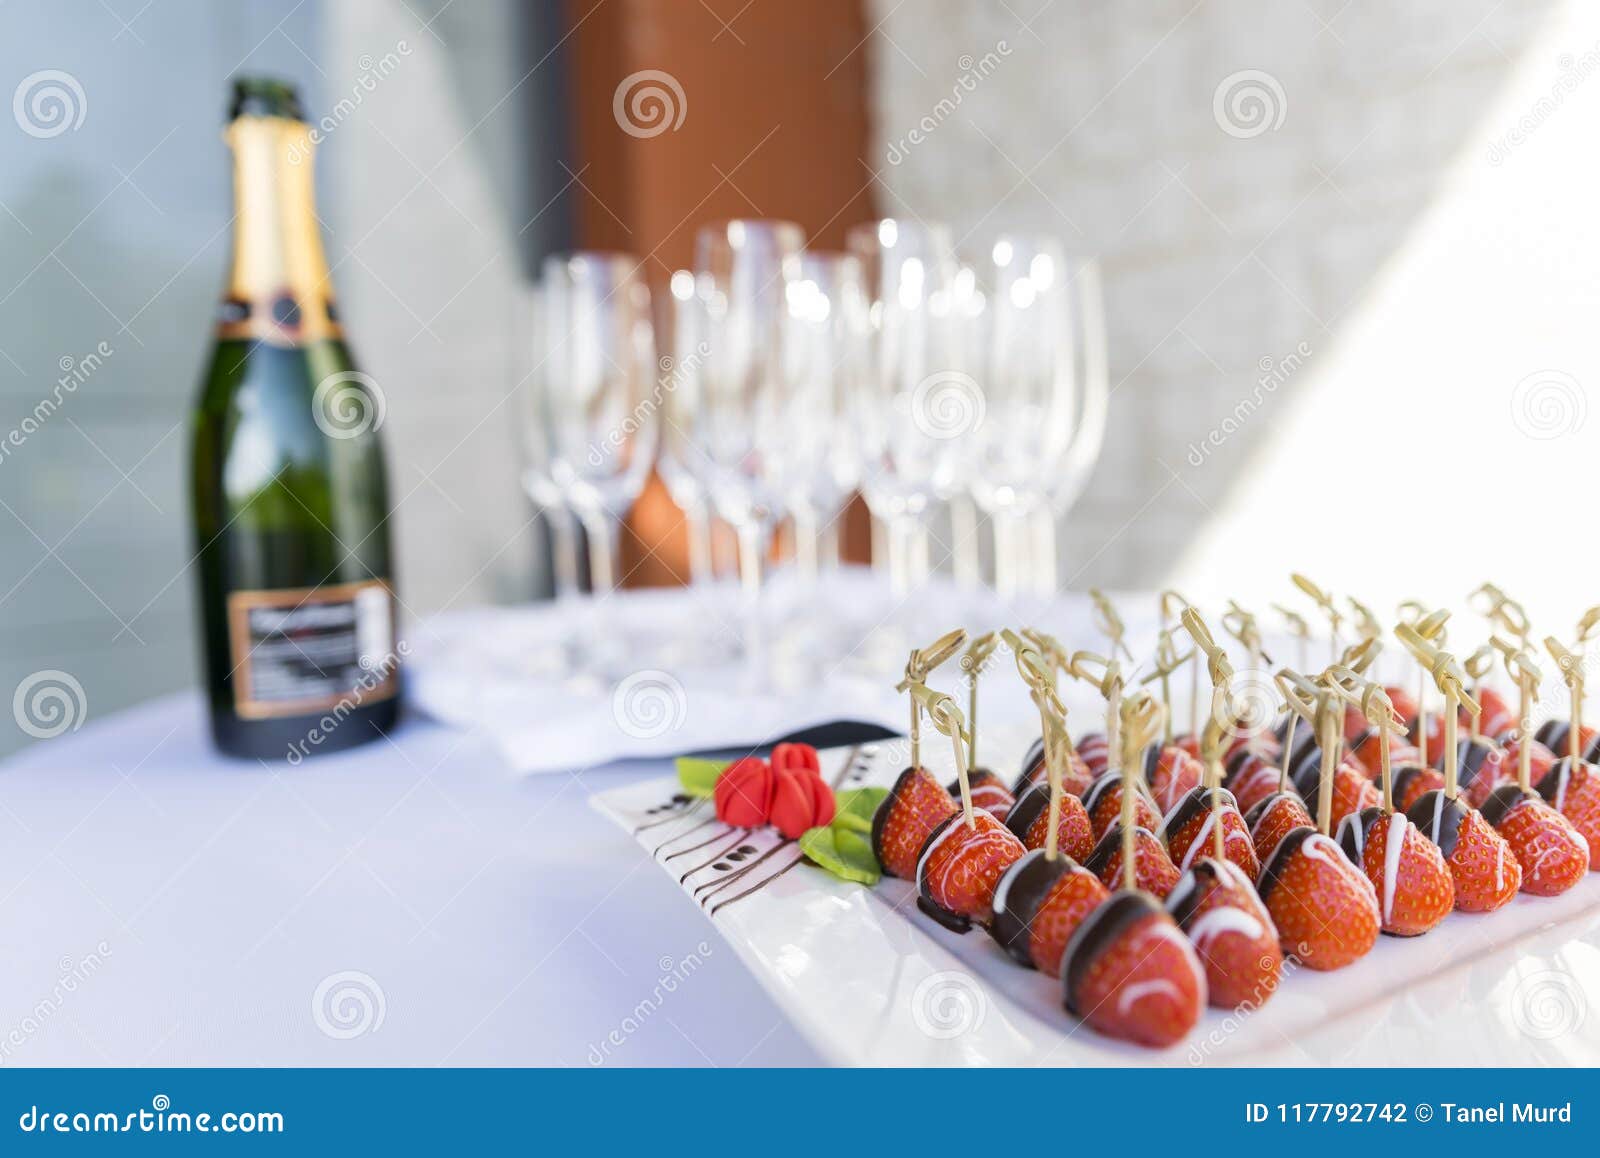 champagne and chocolate covered strawberries served as an appetizer snack and welcome drink